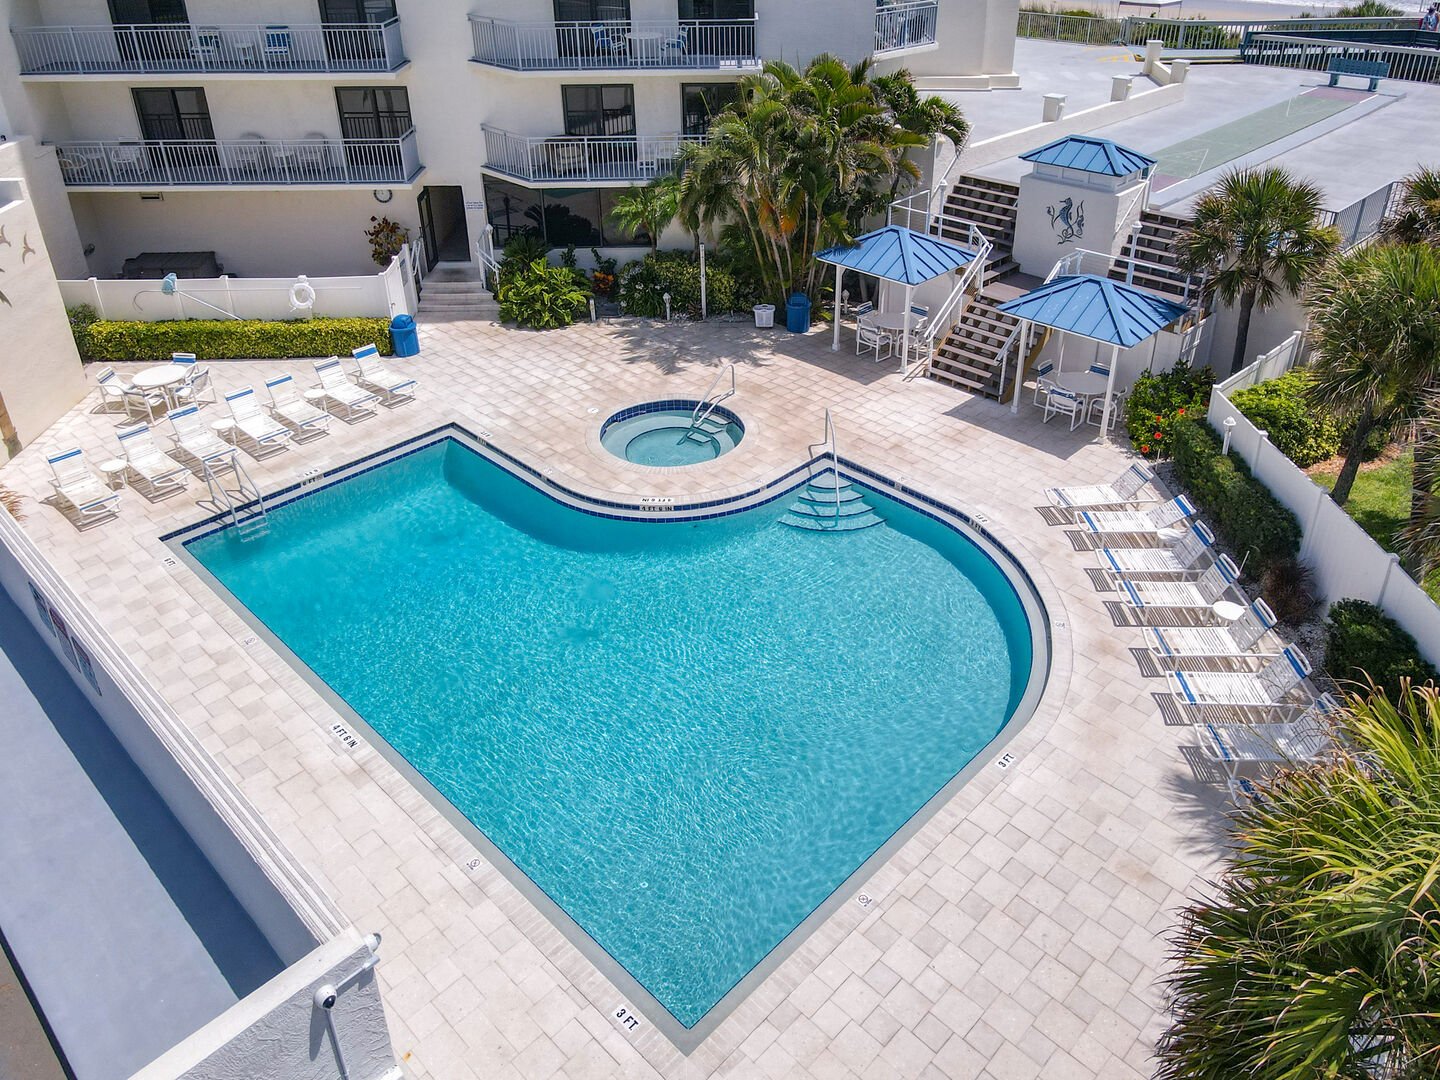 Pool area with plenty of room to bask in the Florida sun!